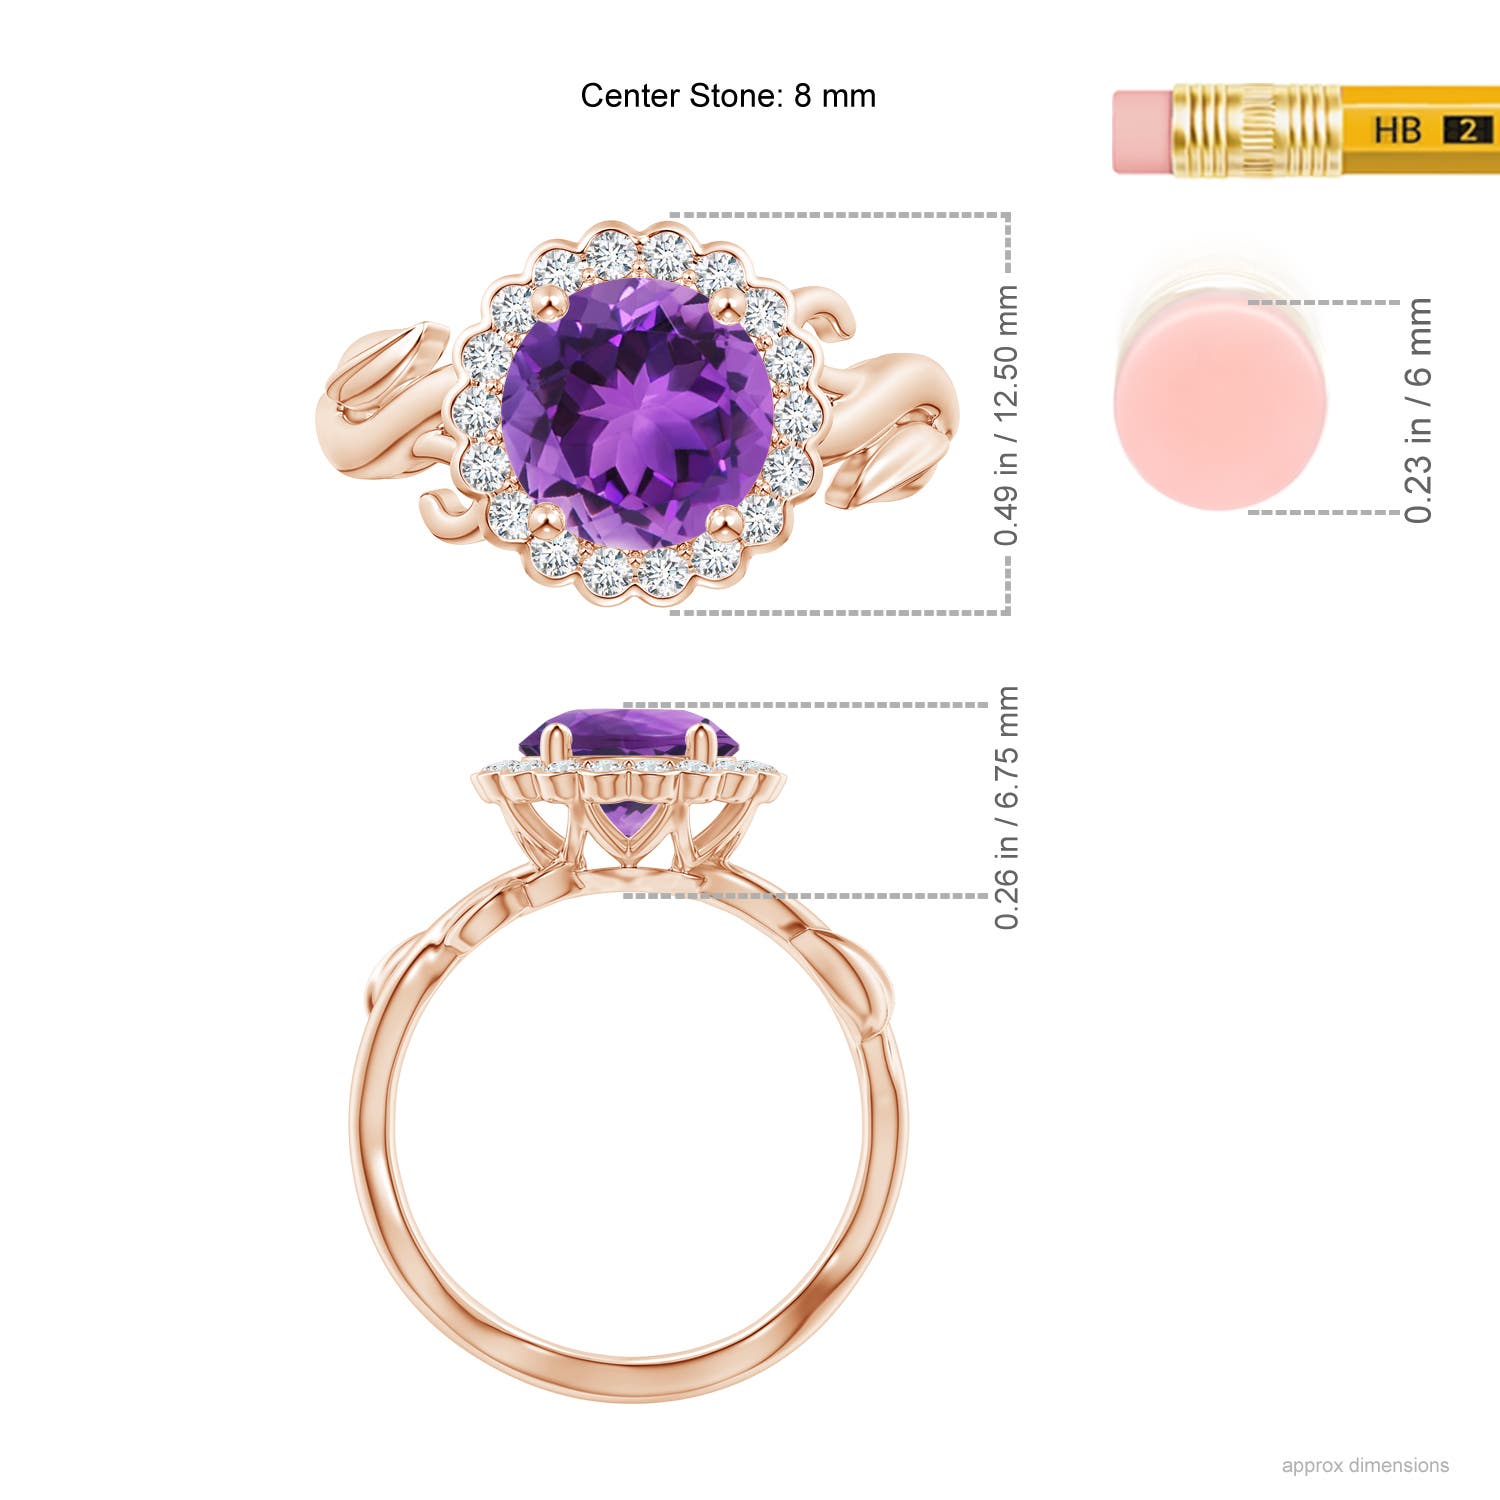 AAA - Amethyst / 1.95 CT / 14 KT Rose Gold